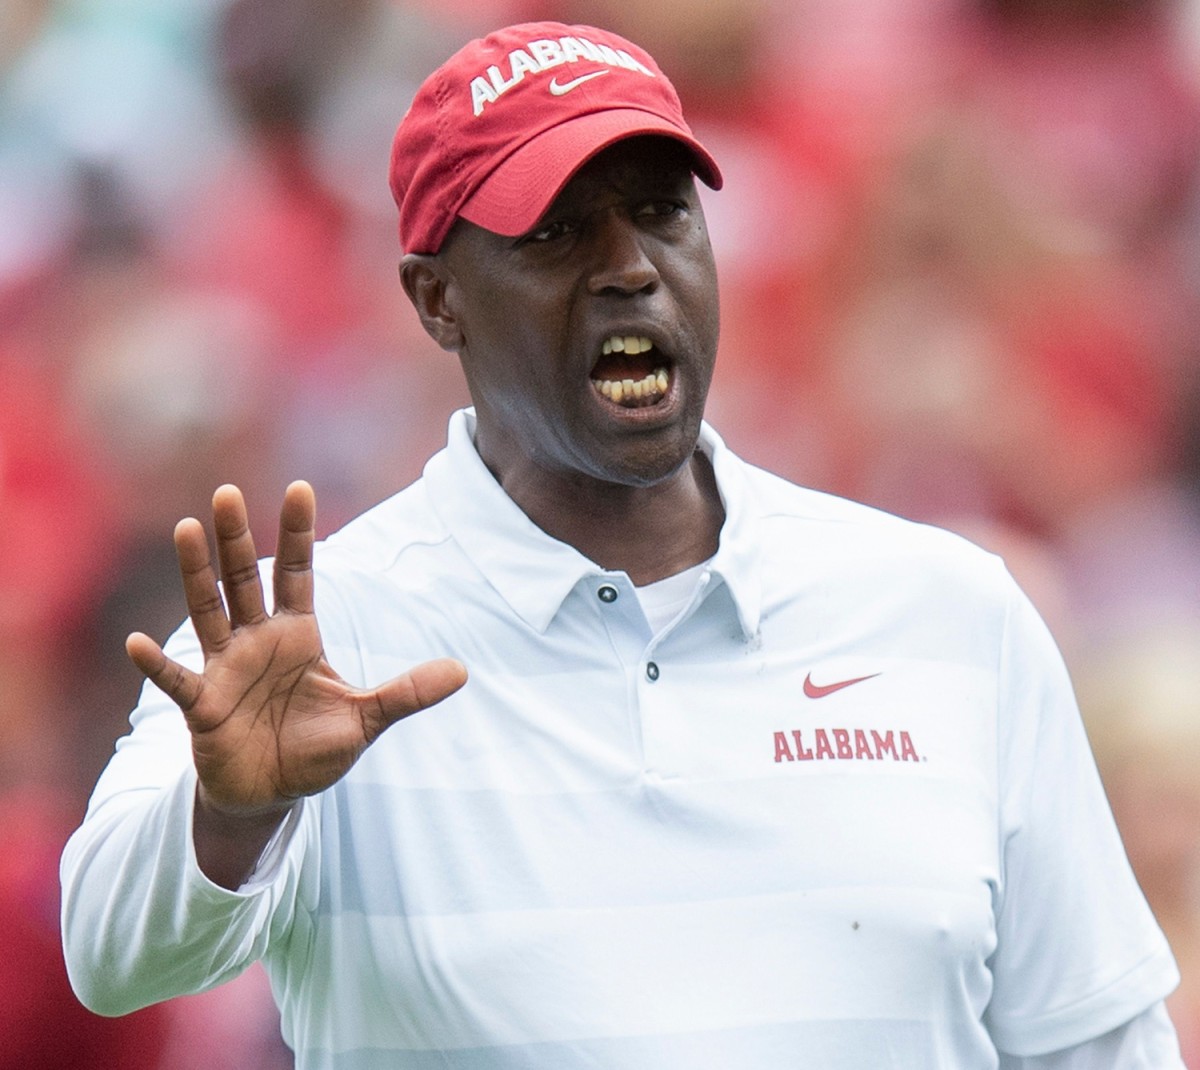 Brian Baker, Alabama's 2019 defensive line coach, was hired in March to coach the Indianapolis Colts' D-line. A Baltimore native who grew up a fan of the Colts, he's also reunited with former Maryland teammate Frank Reich, who is Colts head coach.